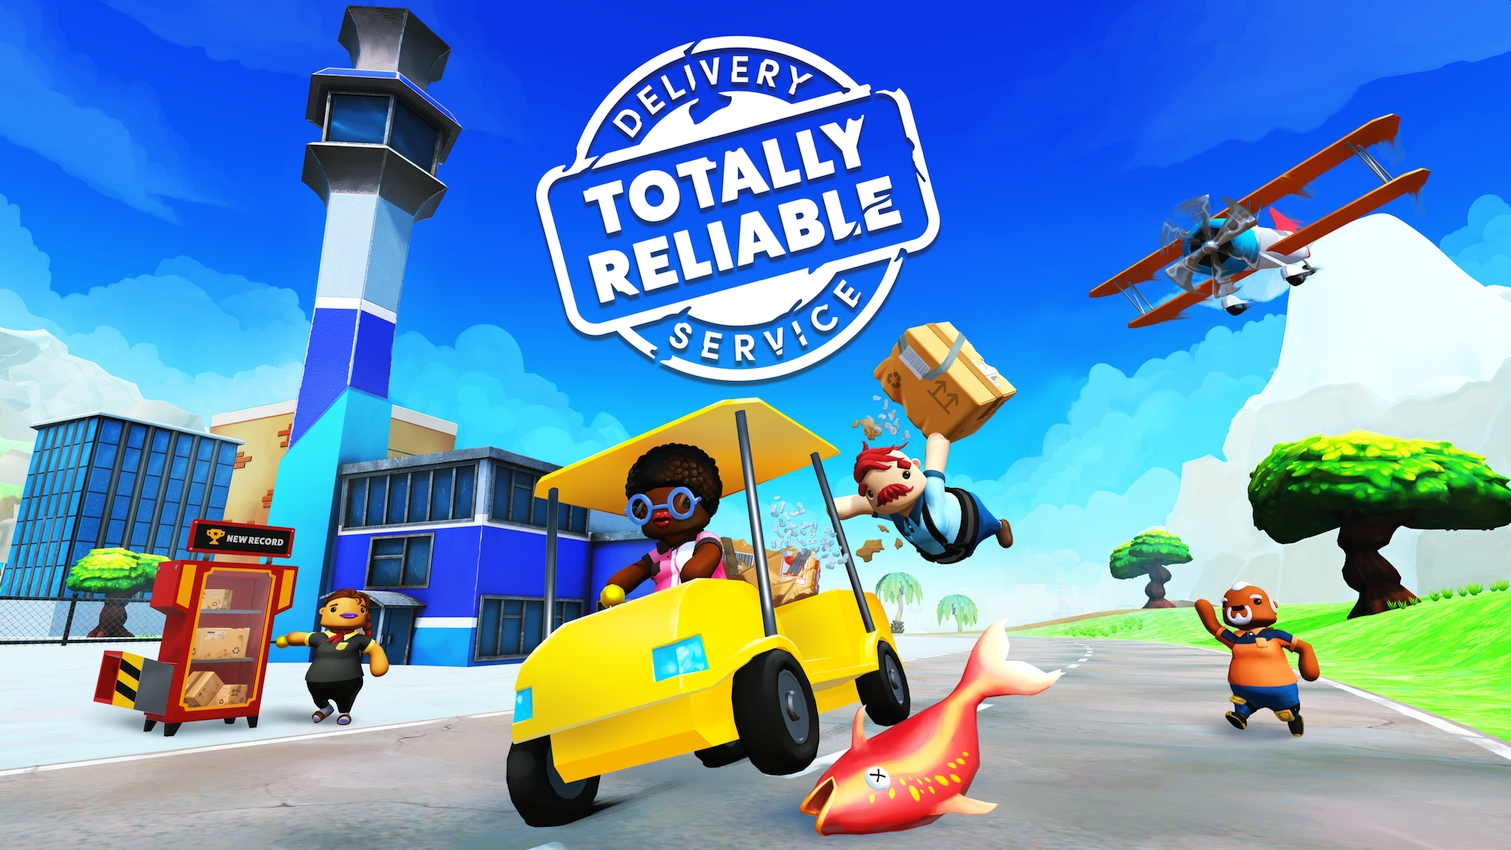 Totally Reliable Delivery Service Is Live On Consoles And Mobile Devices!